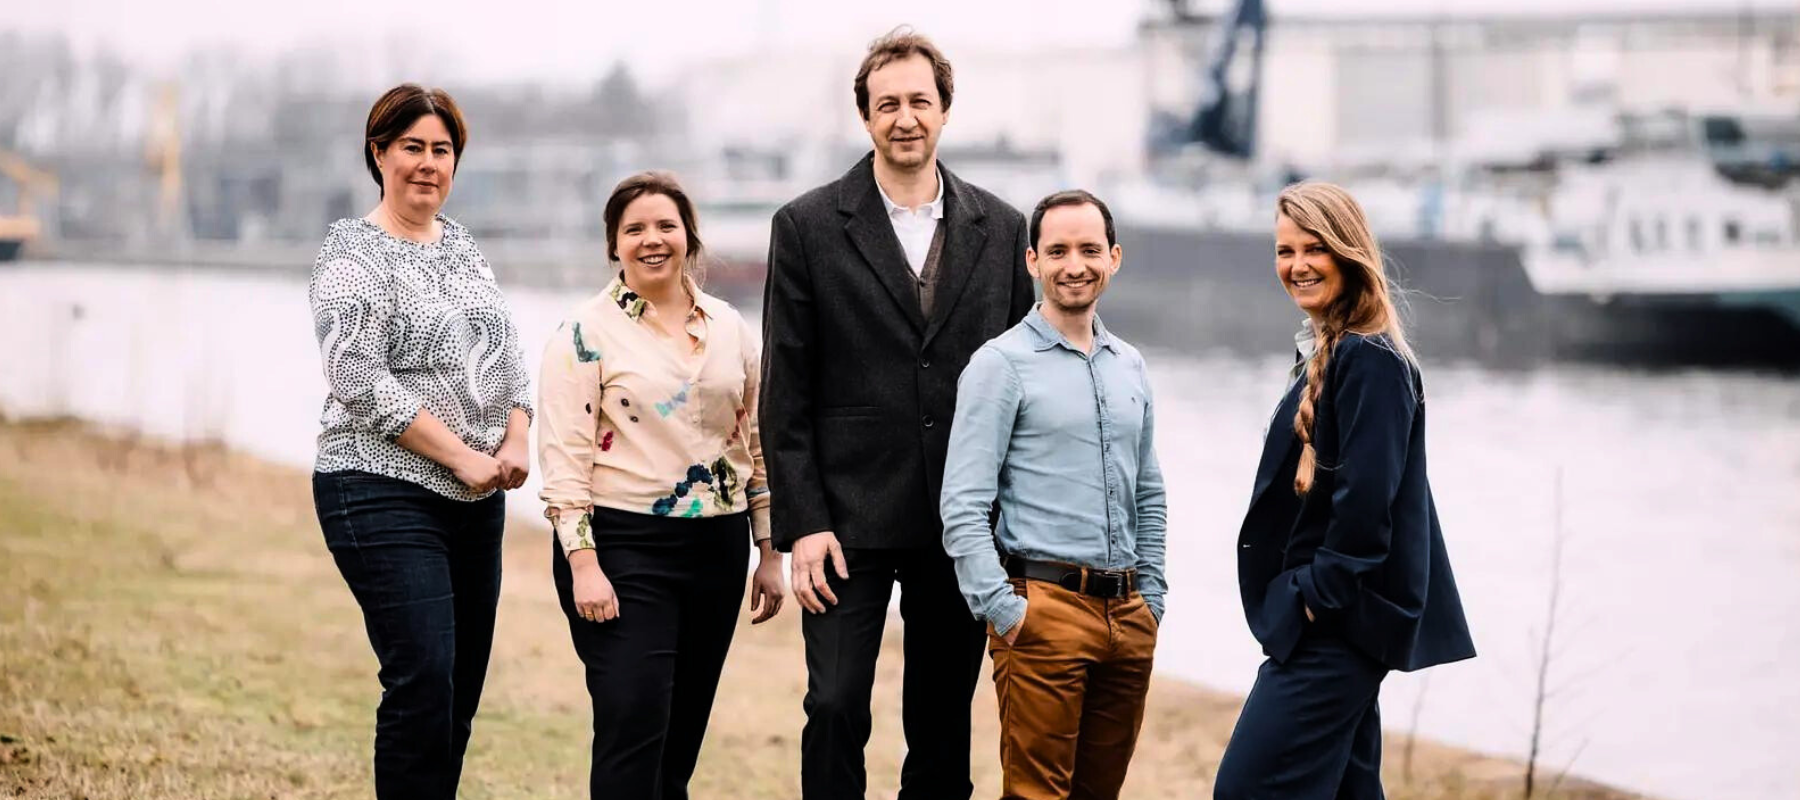 Ghent-based startup AmphiStar secures €6m to launch eco-friendly biosurfactants from waste